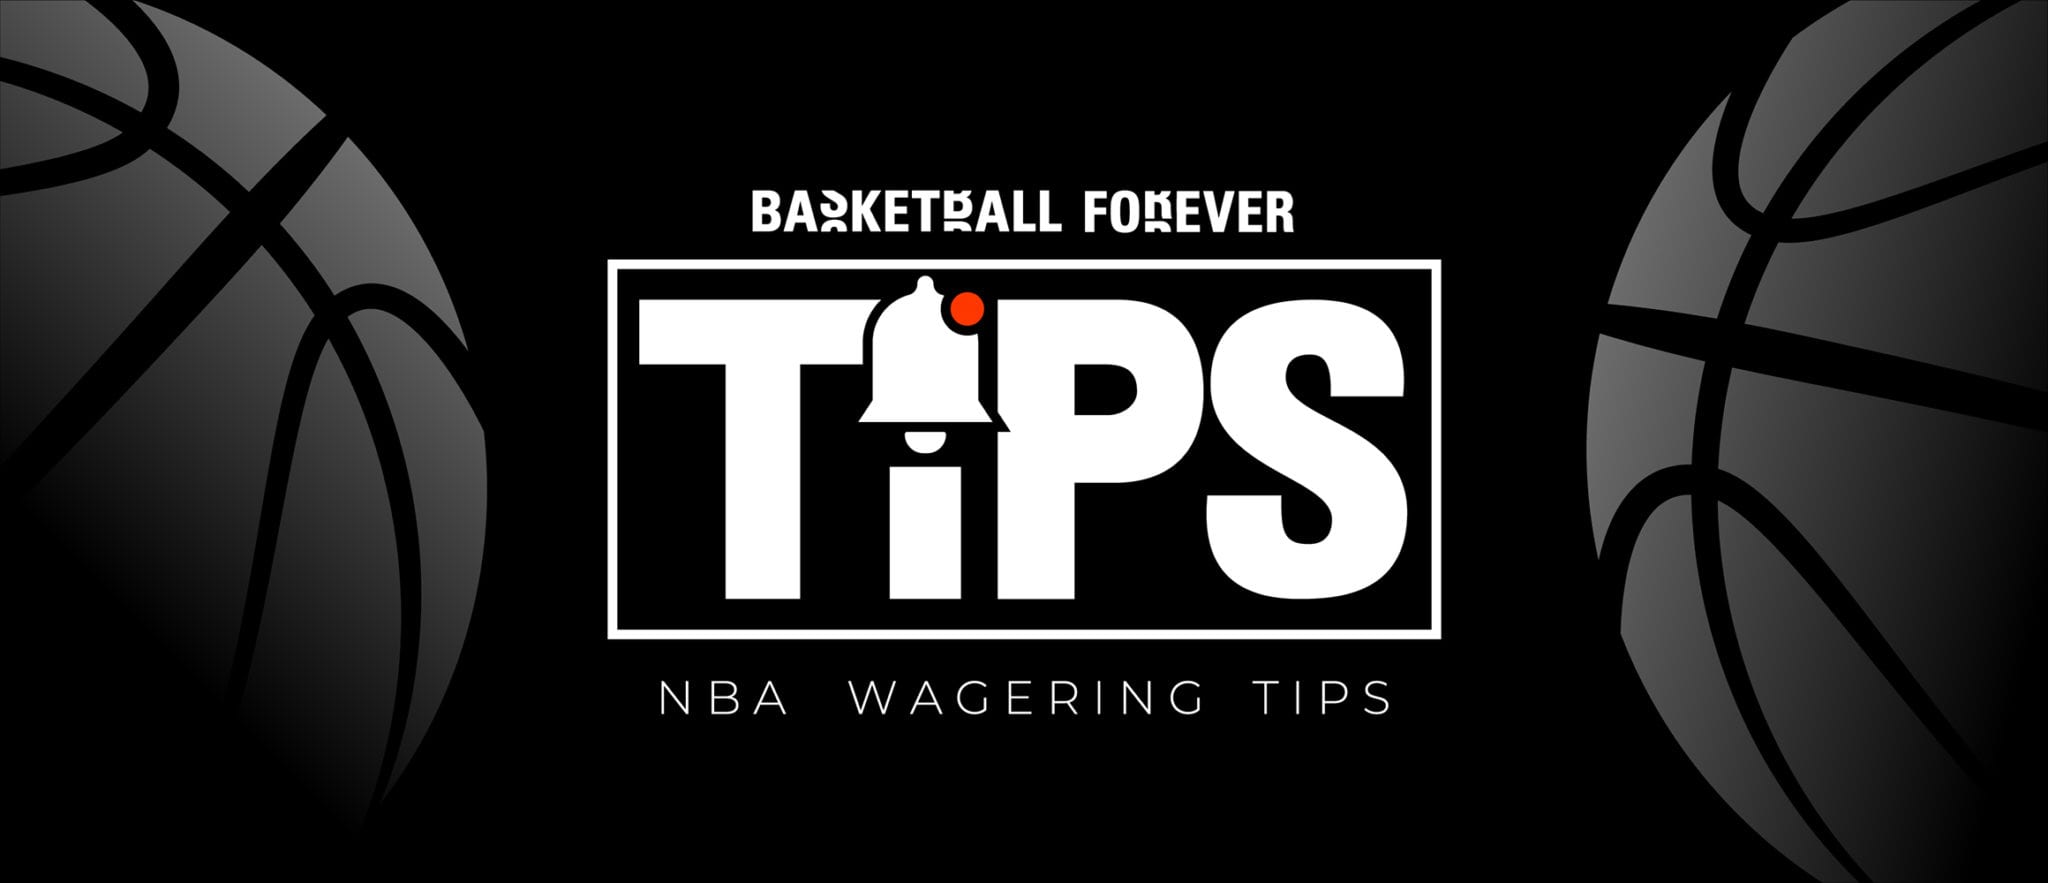 NBA TIPS – March 28, 2021